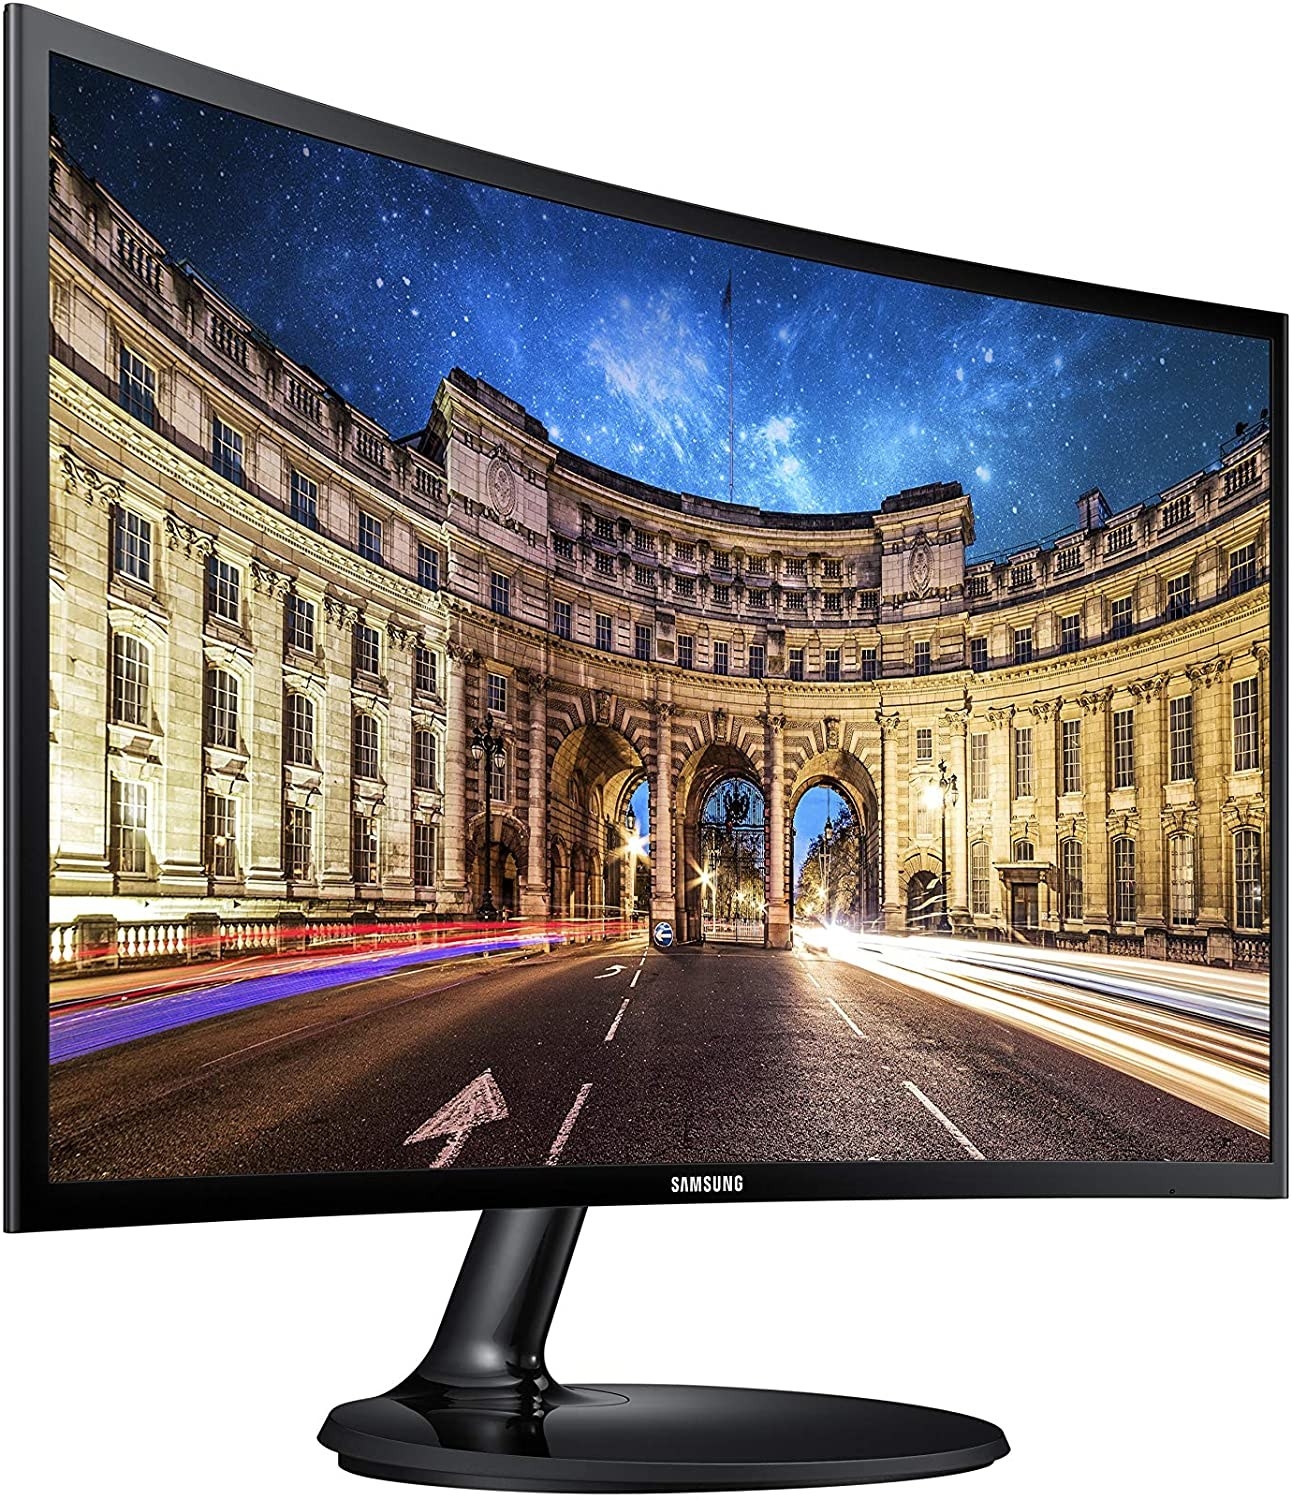 The curved gaming monitor